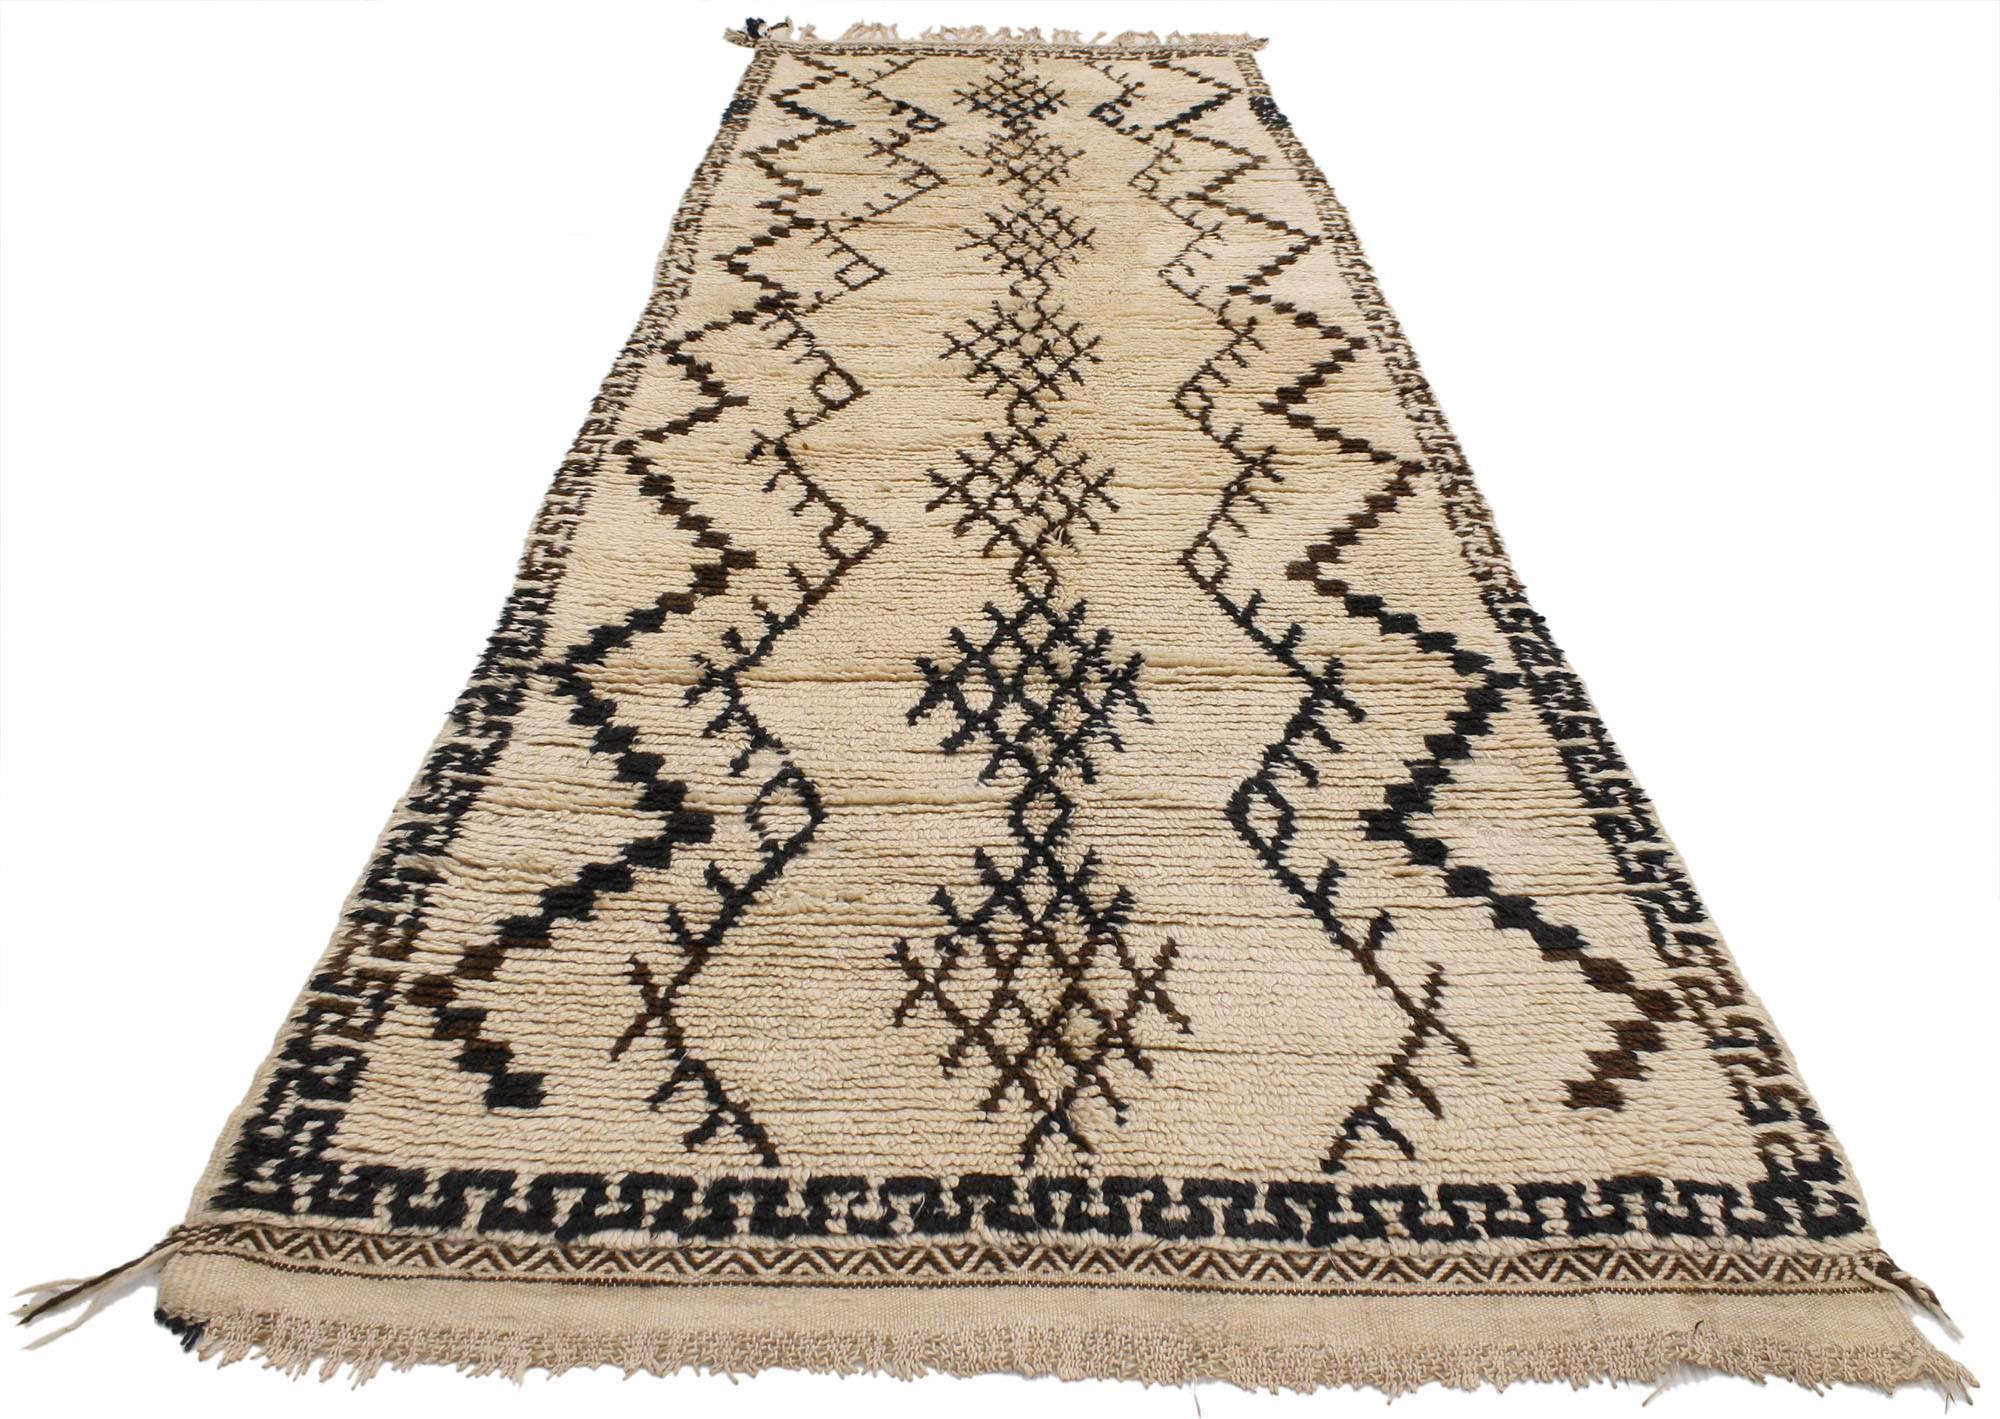 20565, vintage Berber Moroccan rug runner. A muted tone of creamy-beige provides a beautiful backdrop for the espresso, chocolate and black colored designs that overlay this Vintage Berber Moroccan rug. With its tribal style, texture and warmth, the